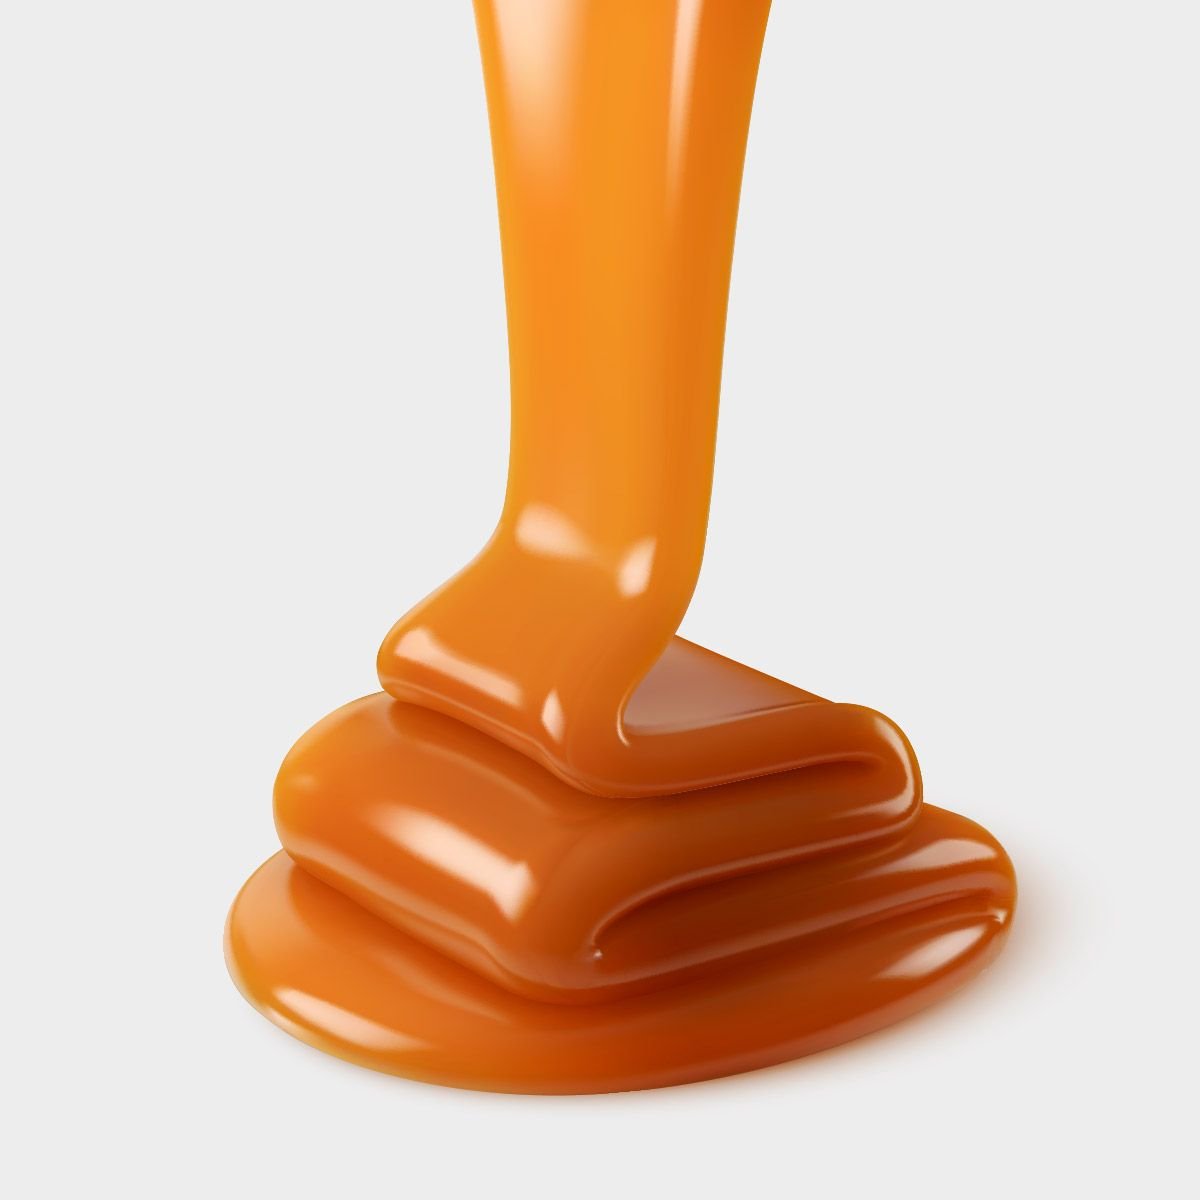 Pouring Daffy Caramel